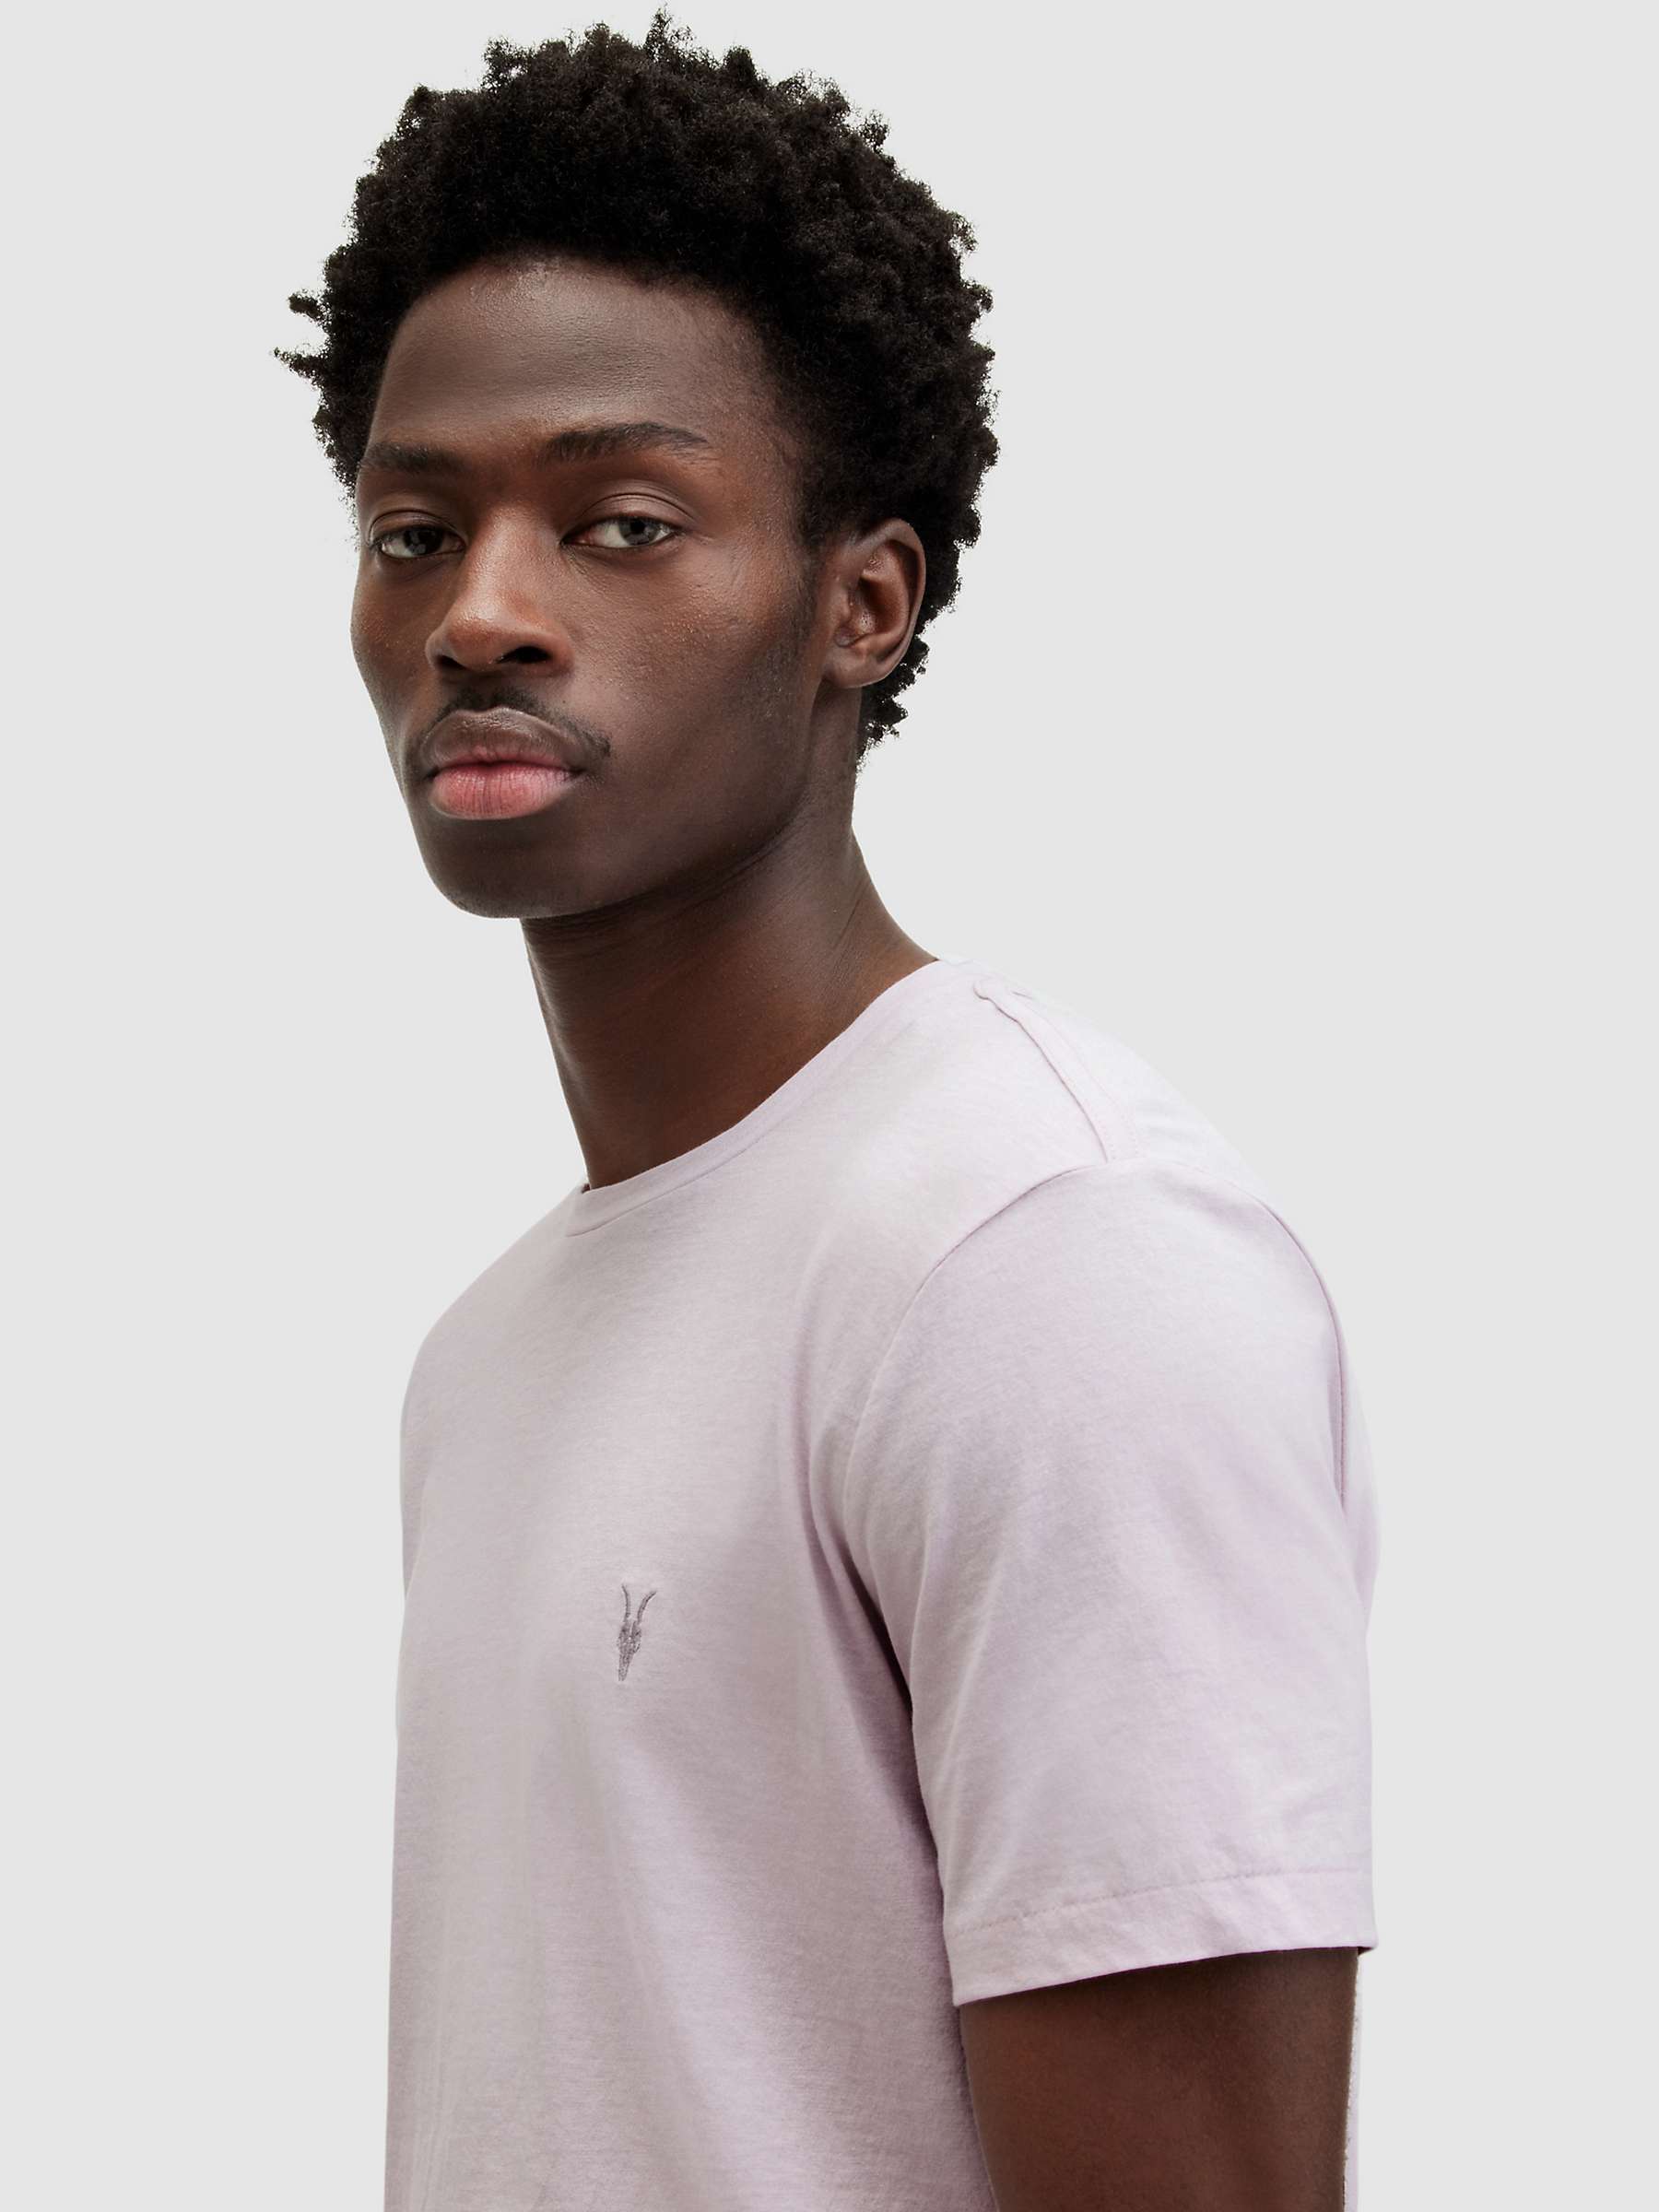 Buy AllSaints Tonic Crew Neck T-Shirt, Sugared Lilac Online at johnlewis.com